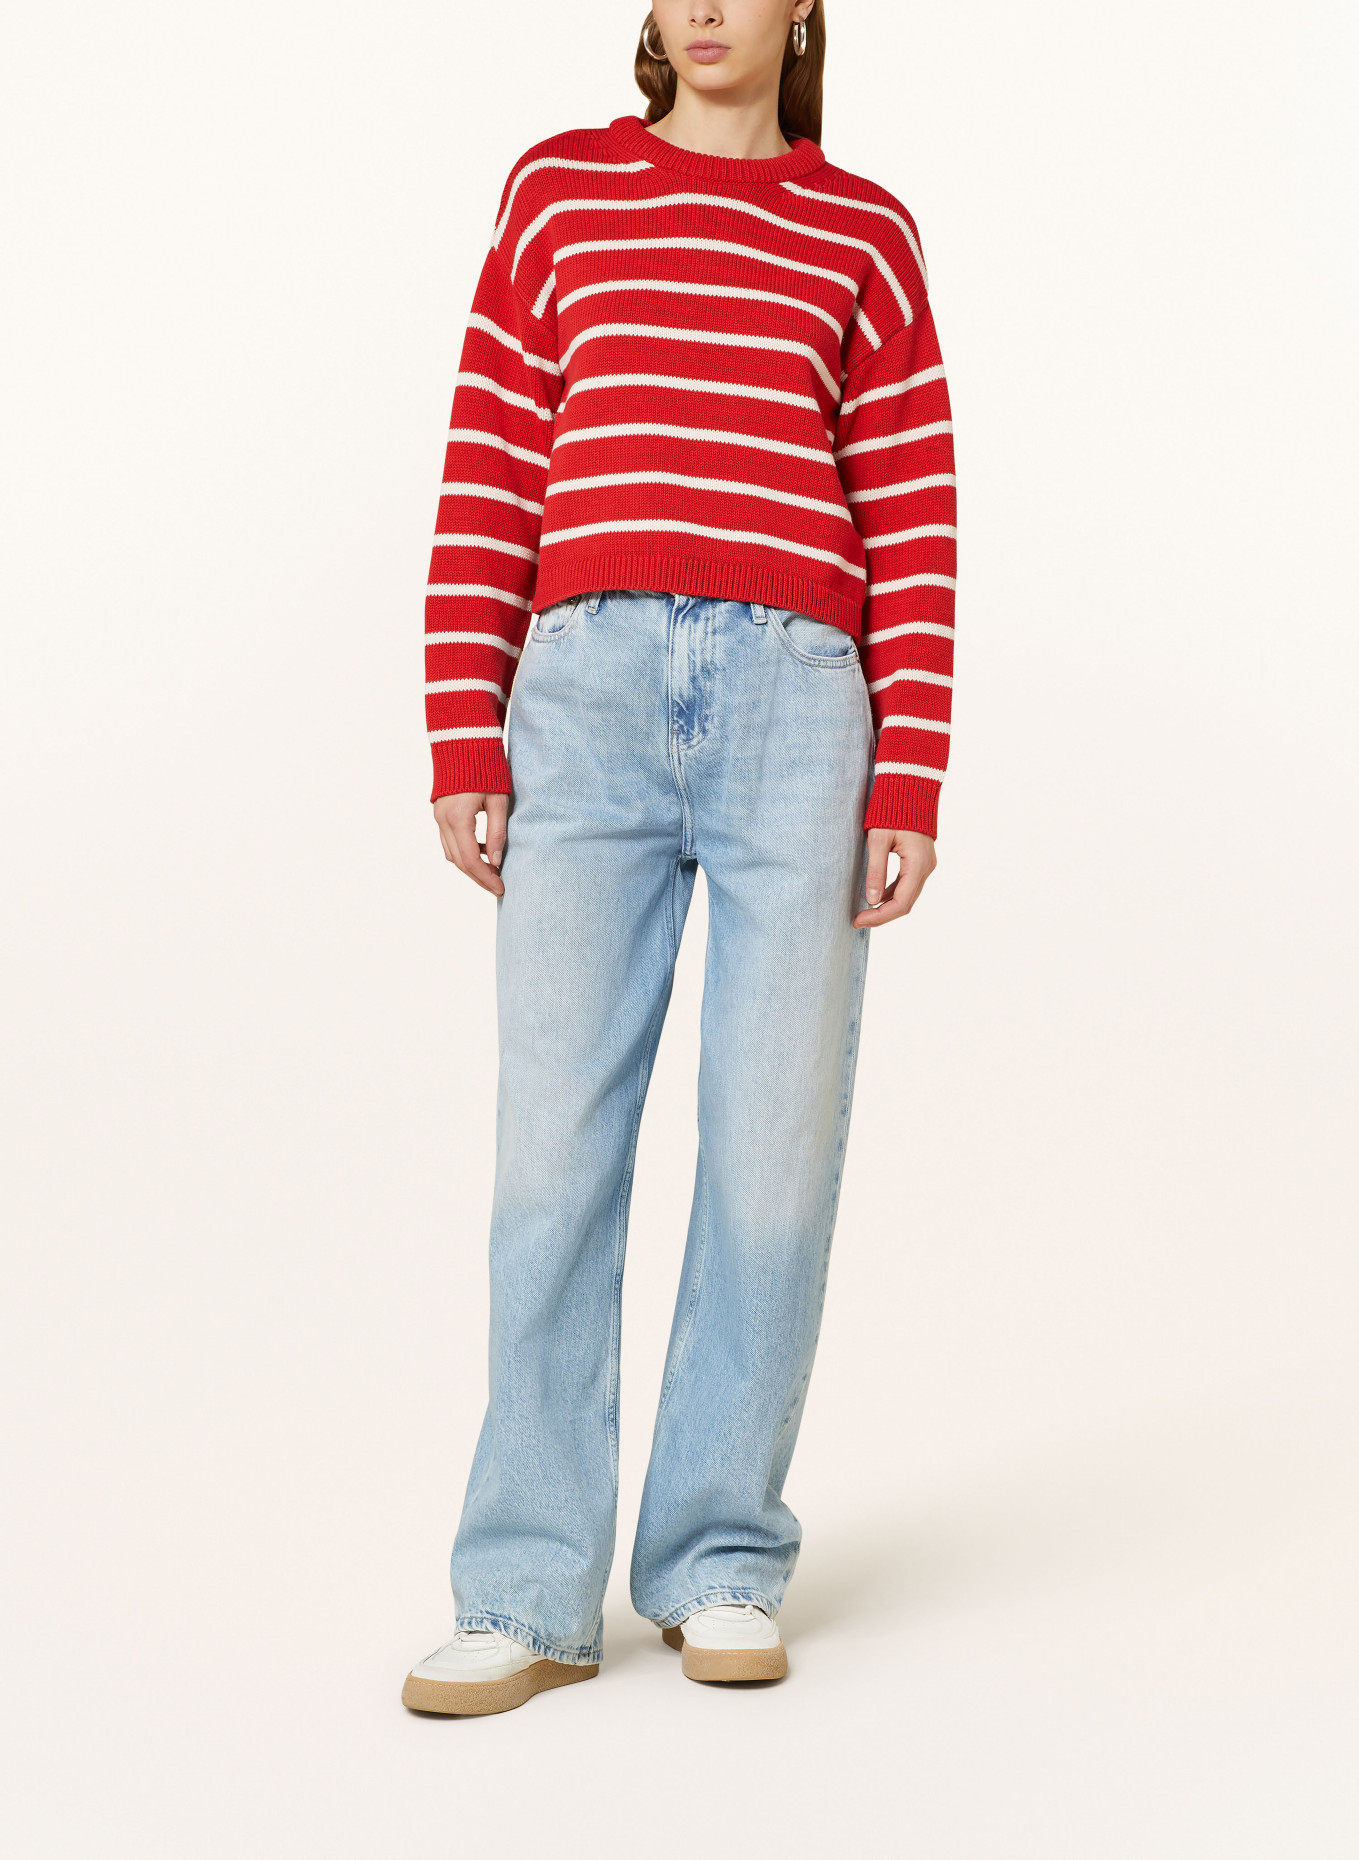 GANT Cropped-Pullover, Farbe: WEISS/ ROT (Bild 2)